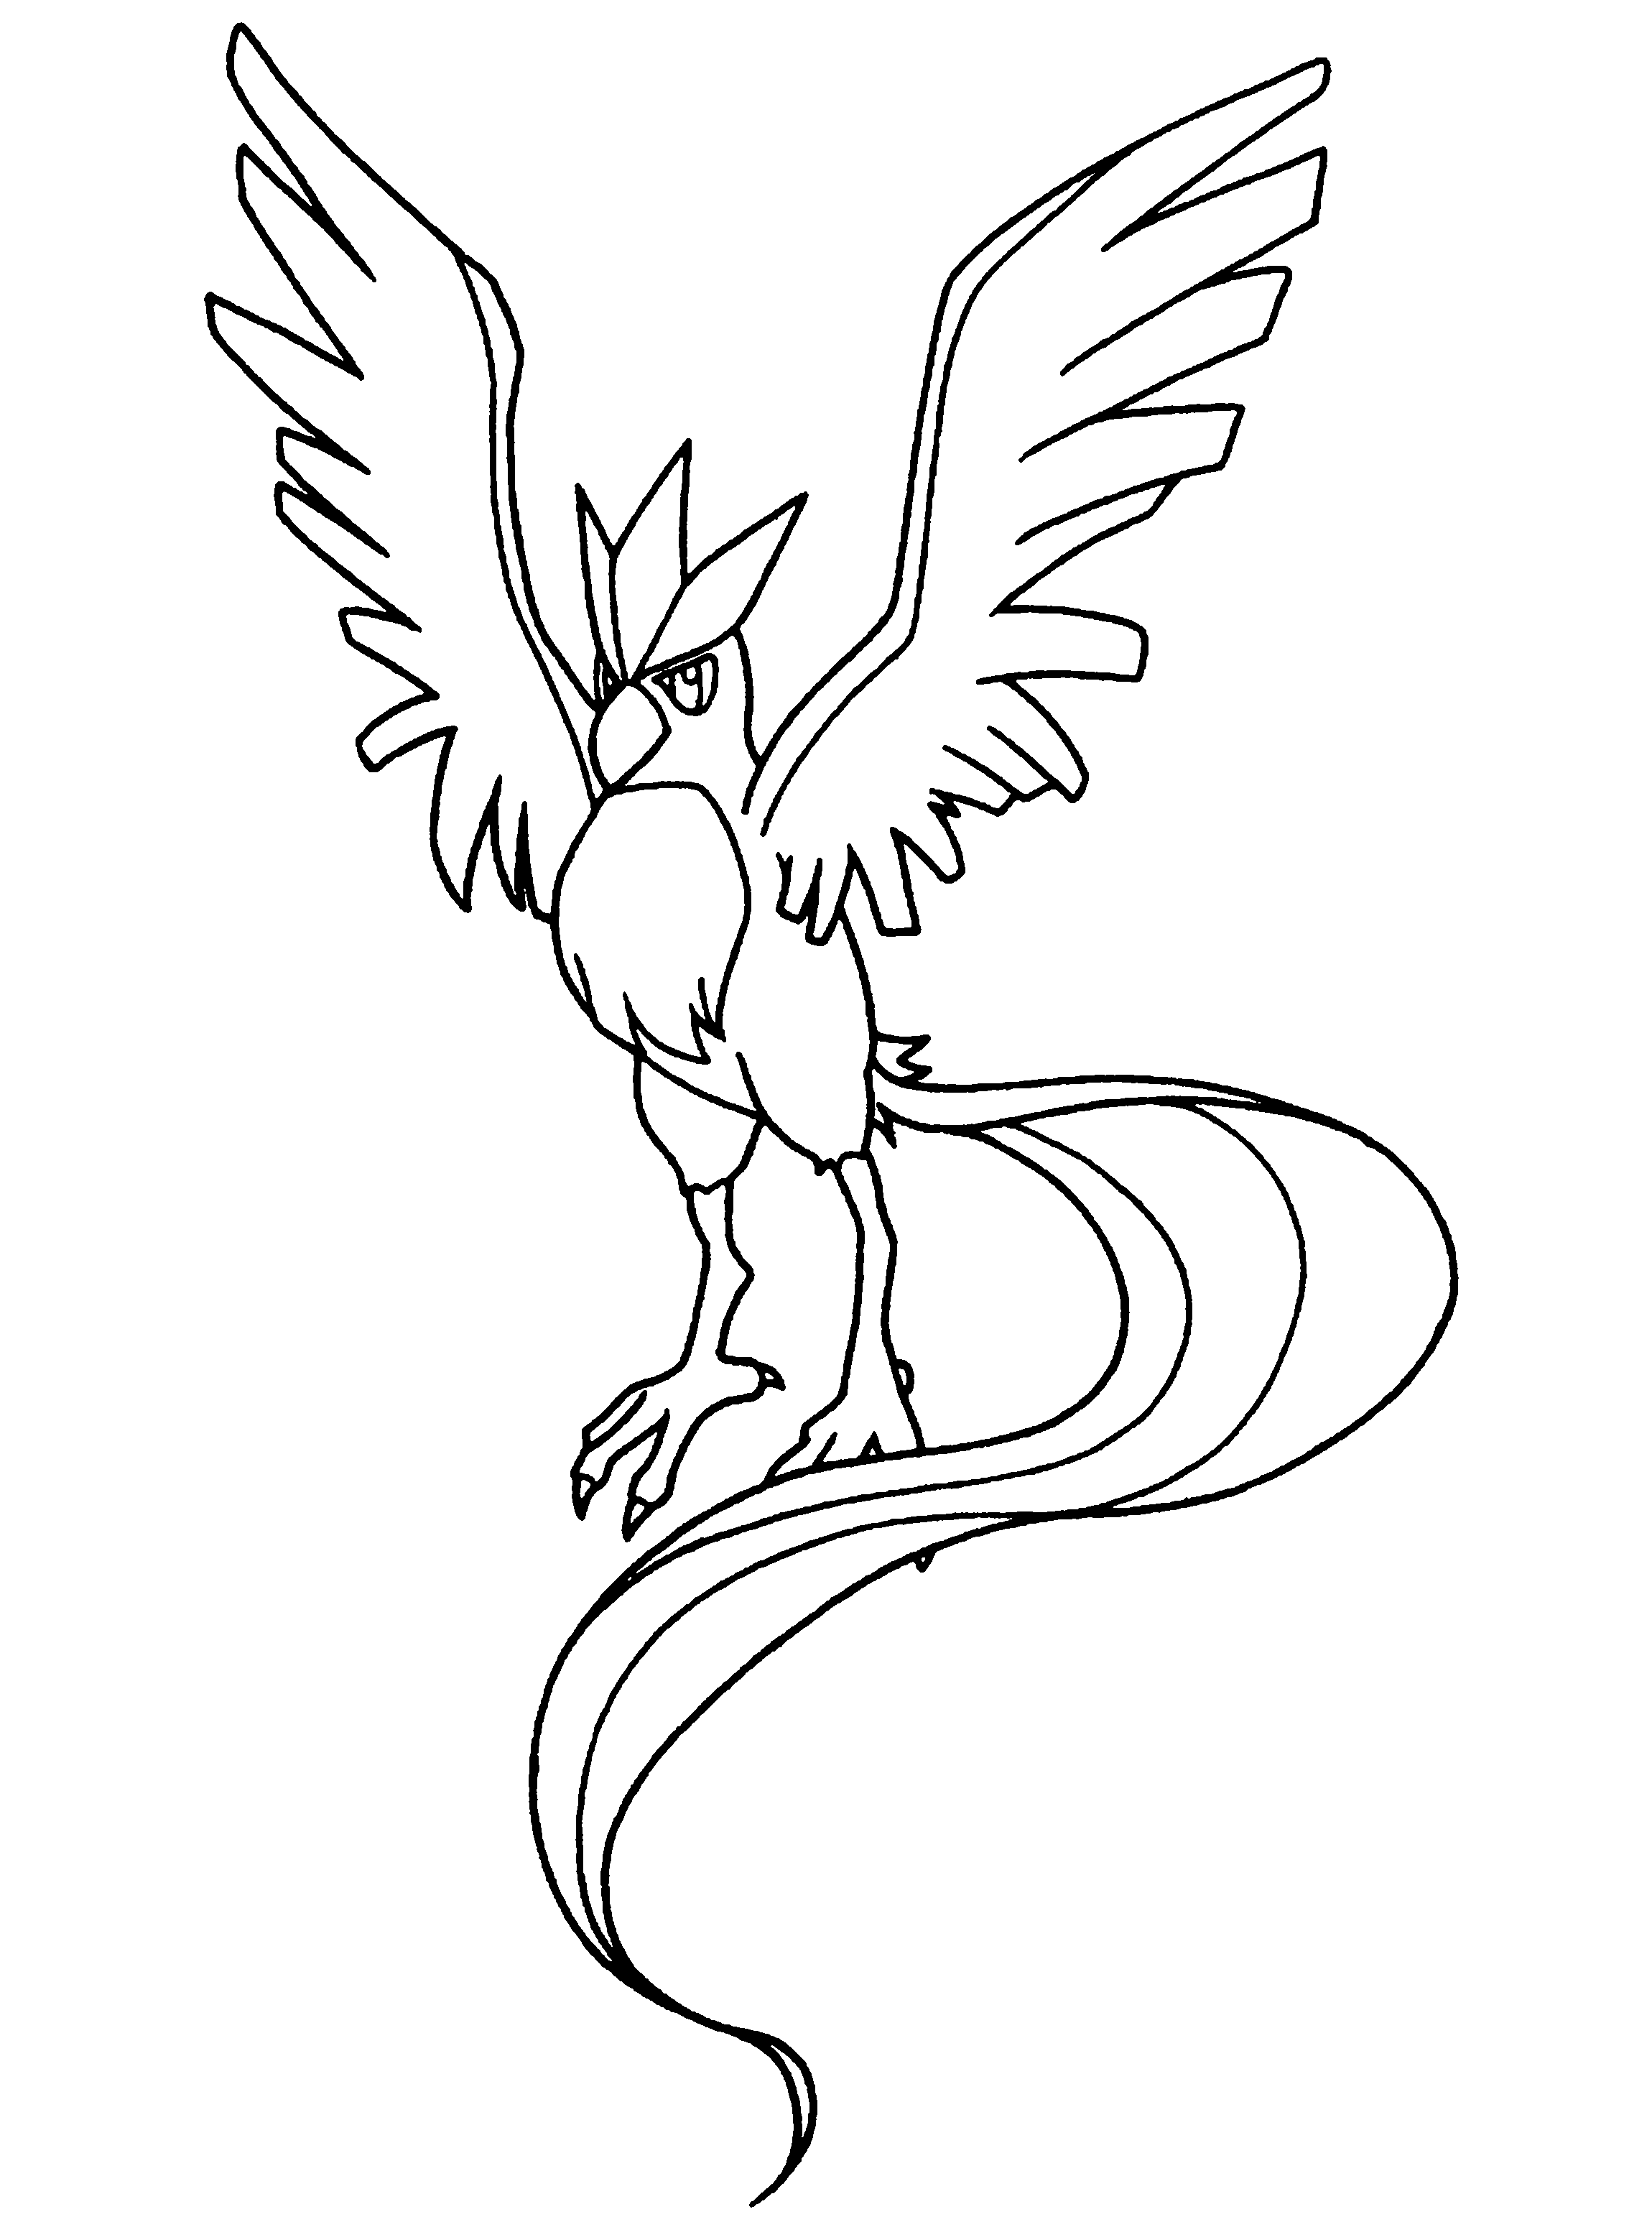 Pokemon Articuno Coloring Pages - High Quality Coloring Pages